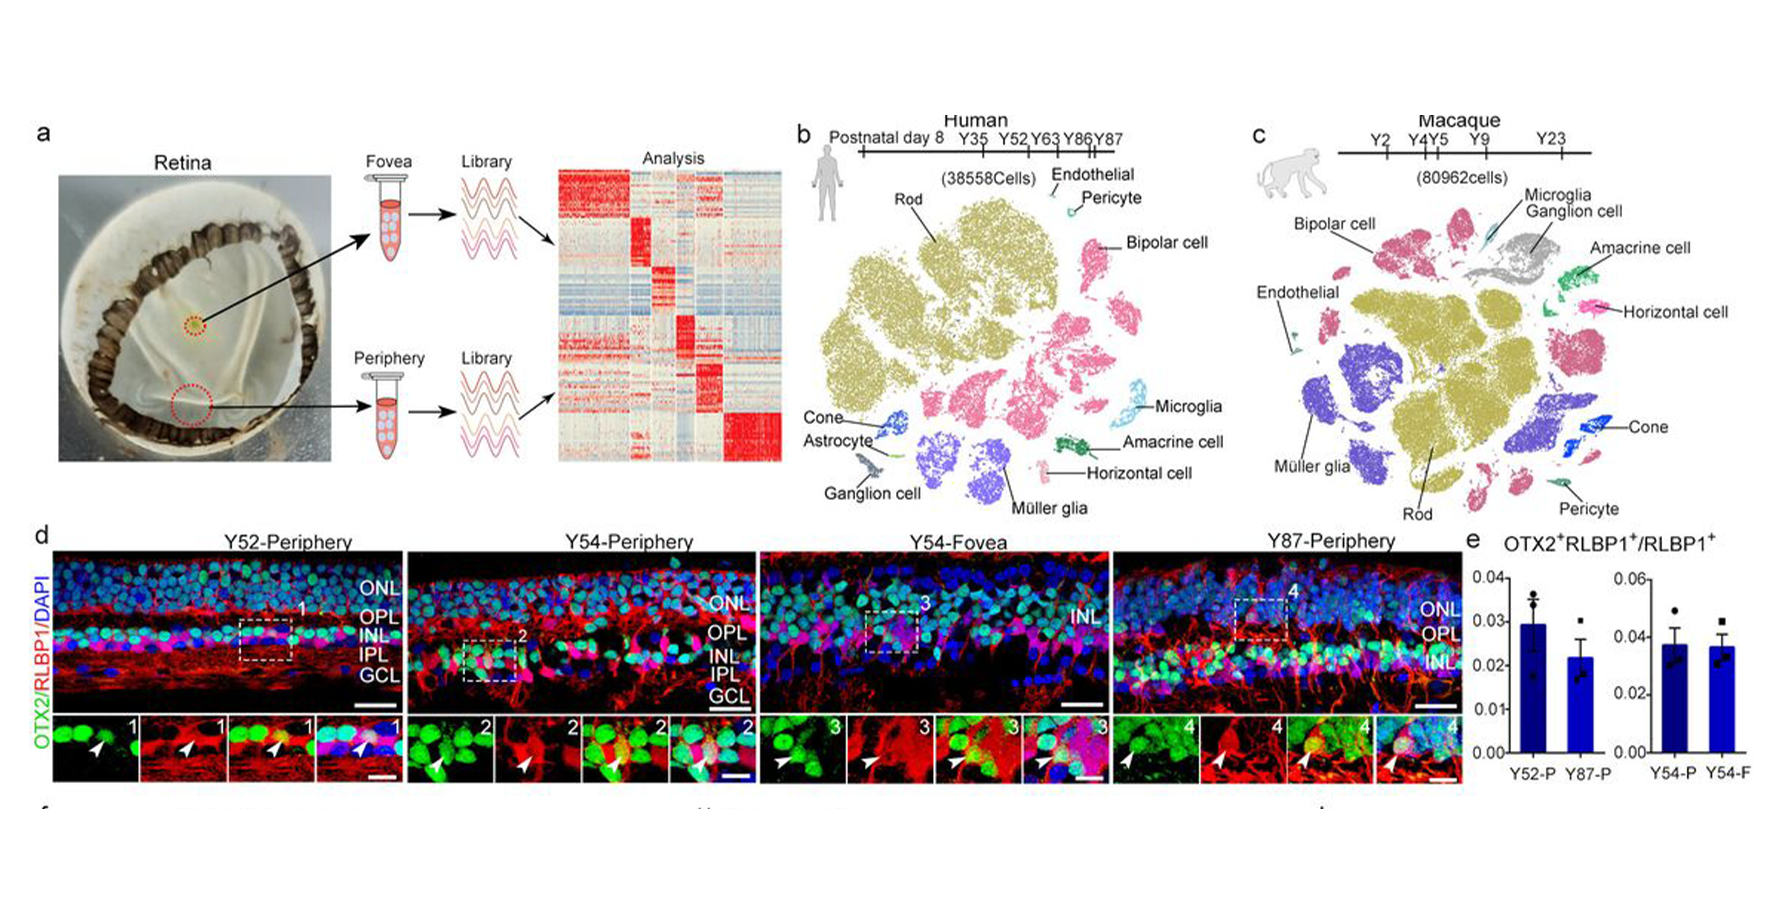 A single-cell transcriptome atlas of the aging human and macaque retina